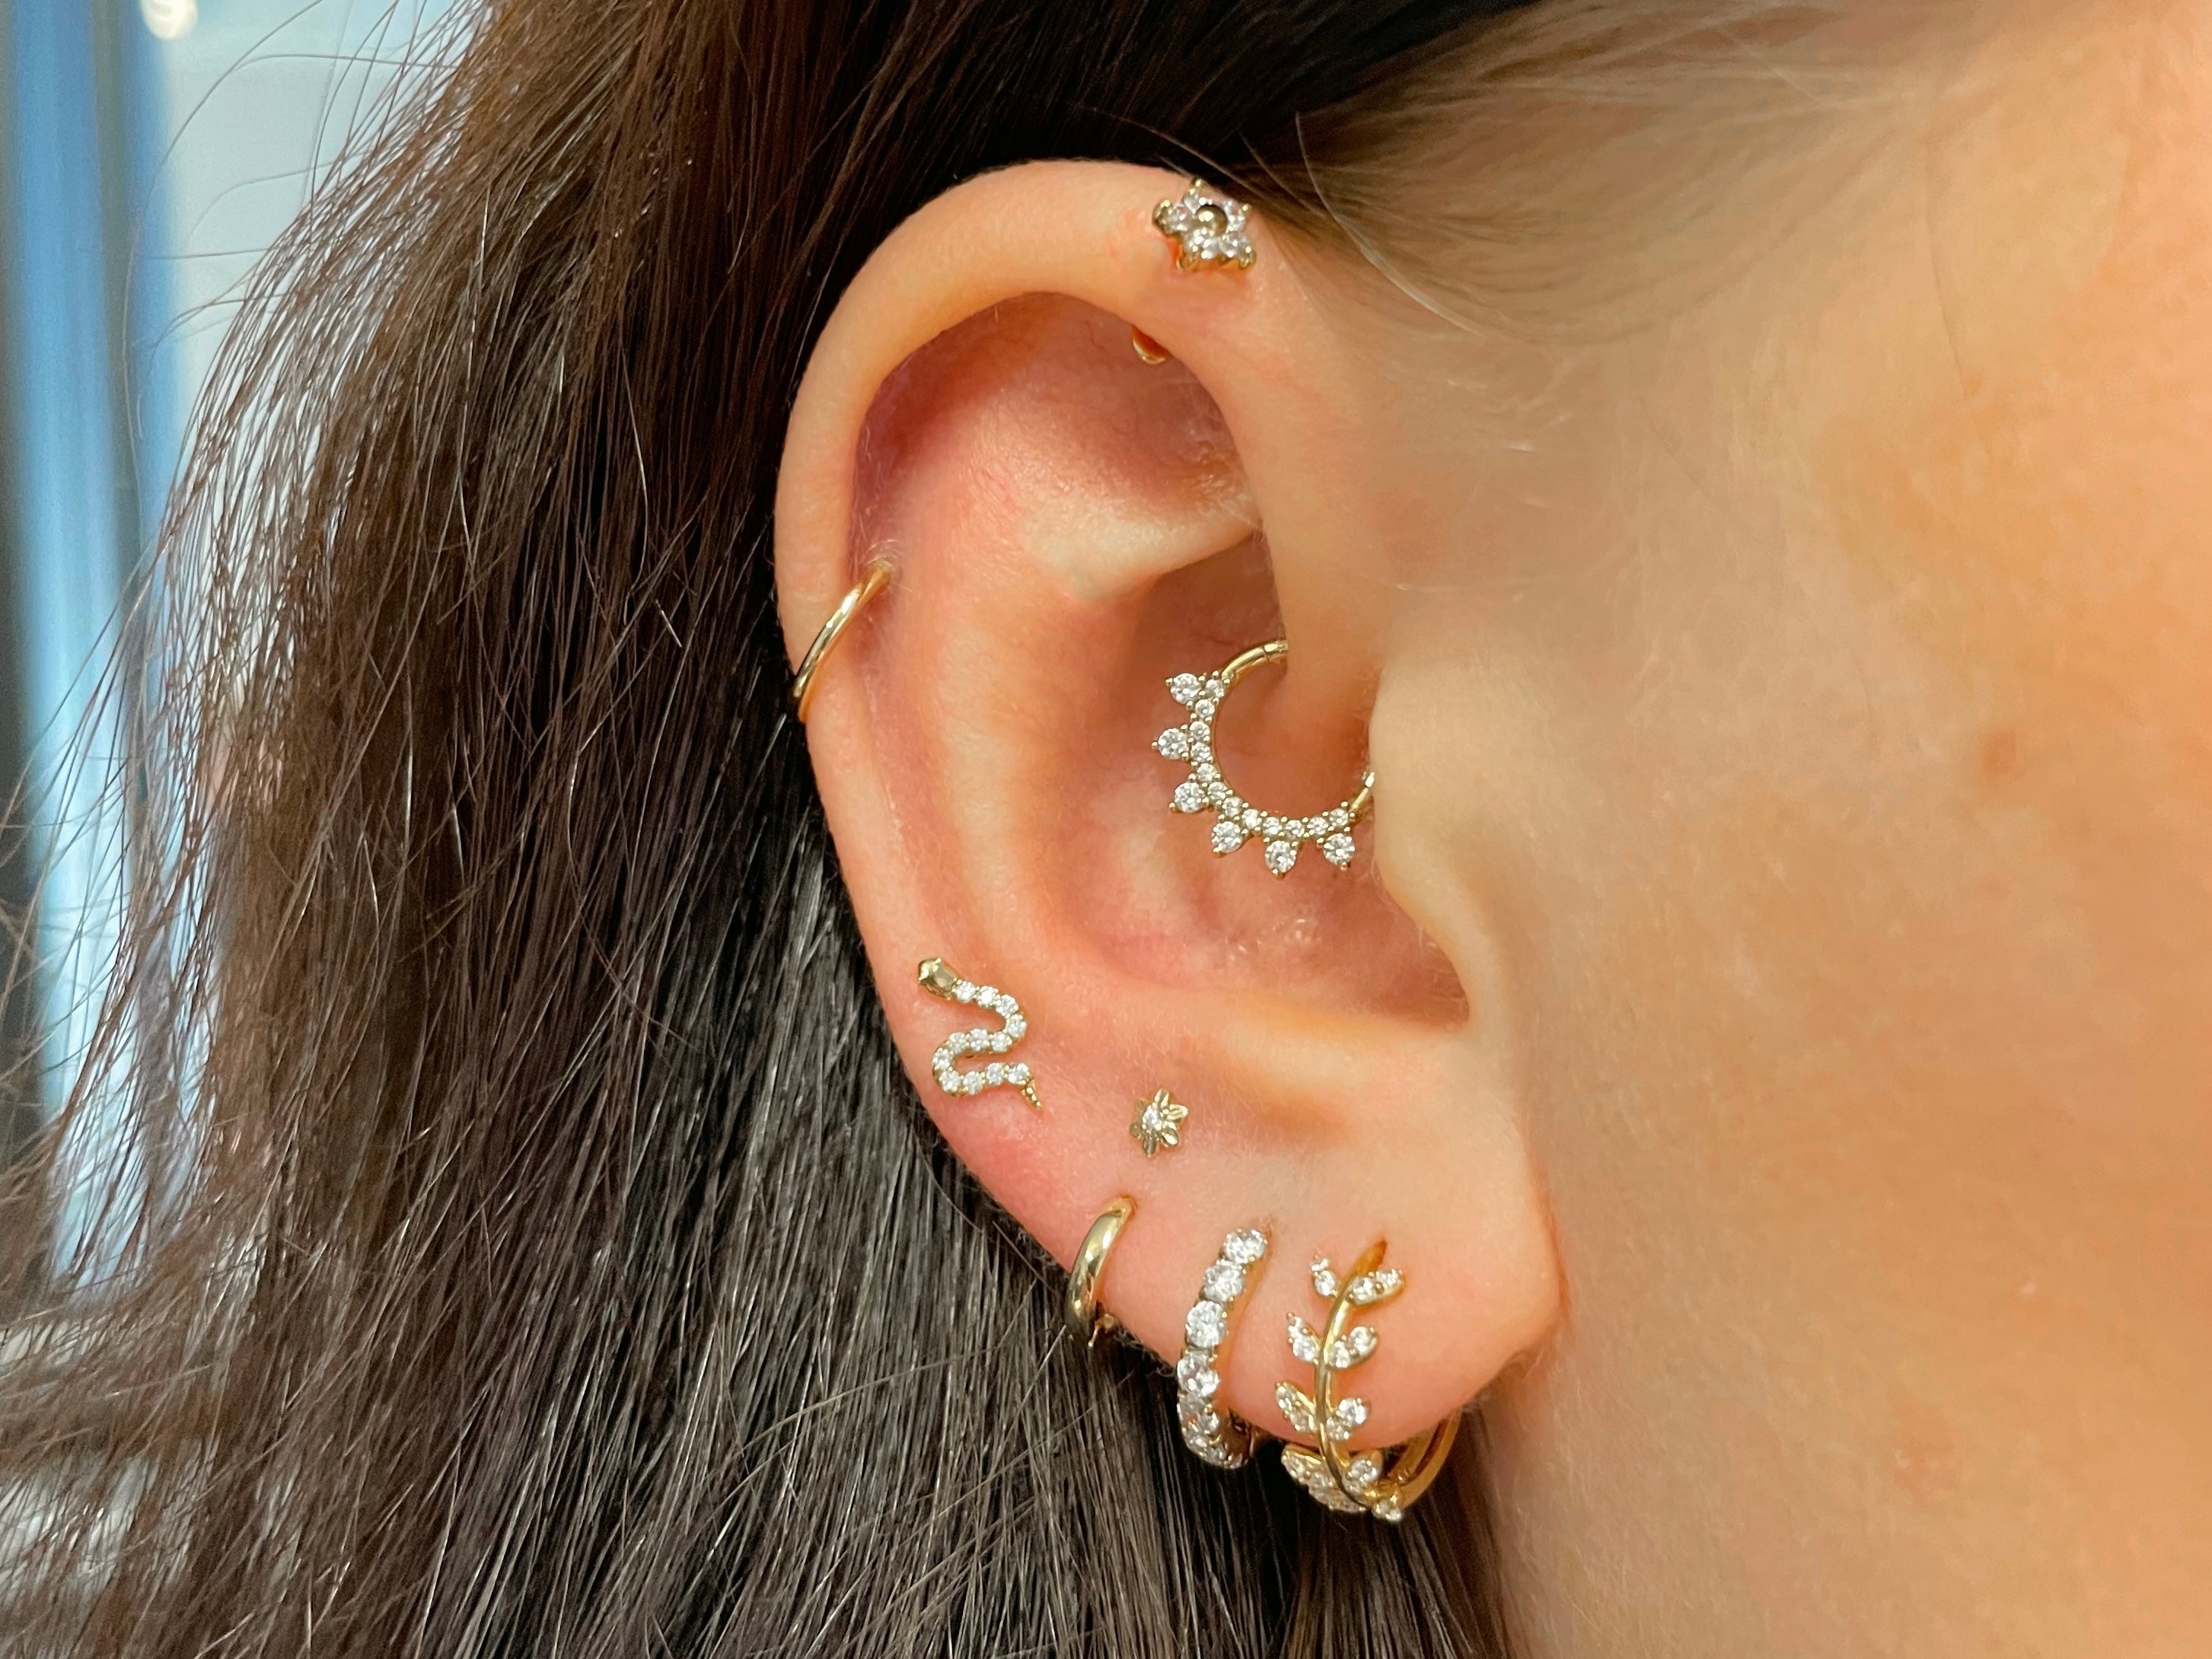 Everything you need to know about stacked lobe piercings – Laura Bond